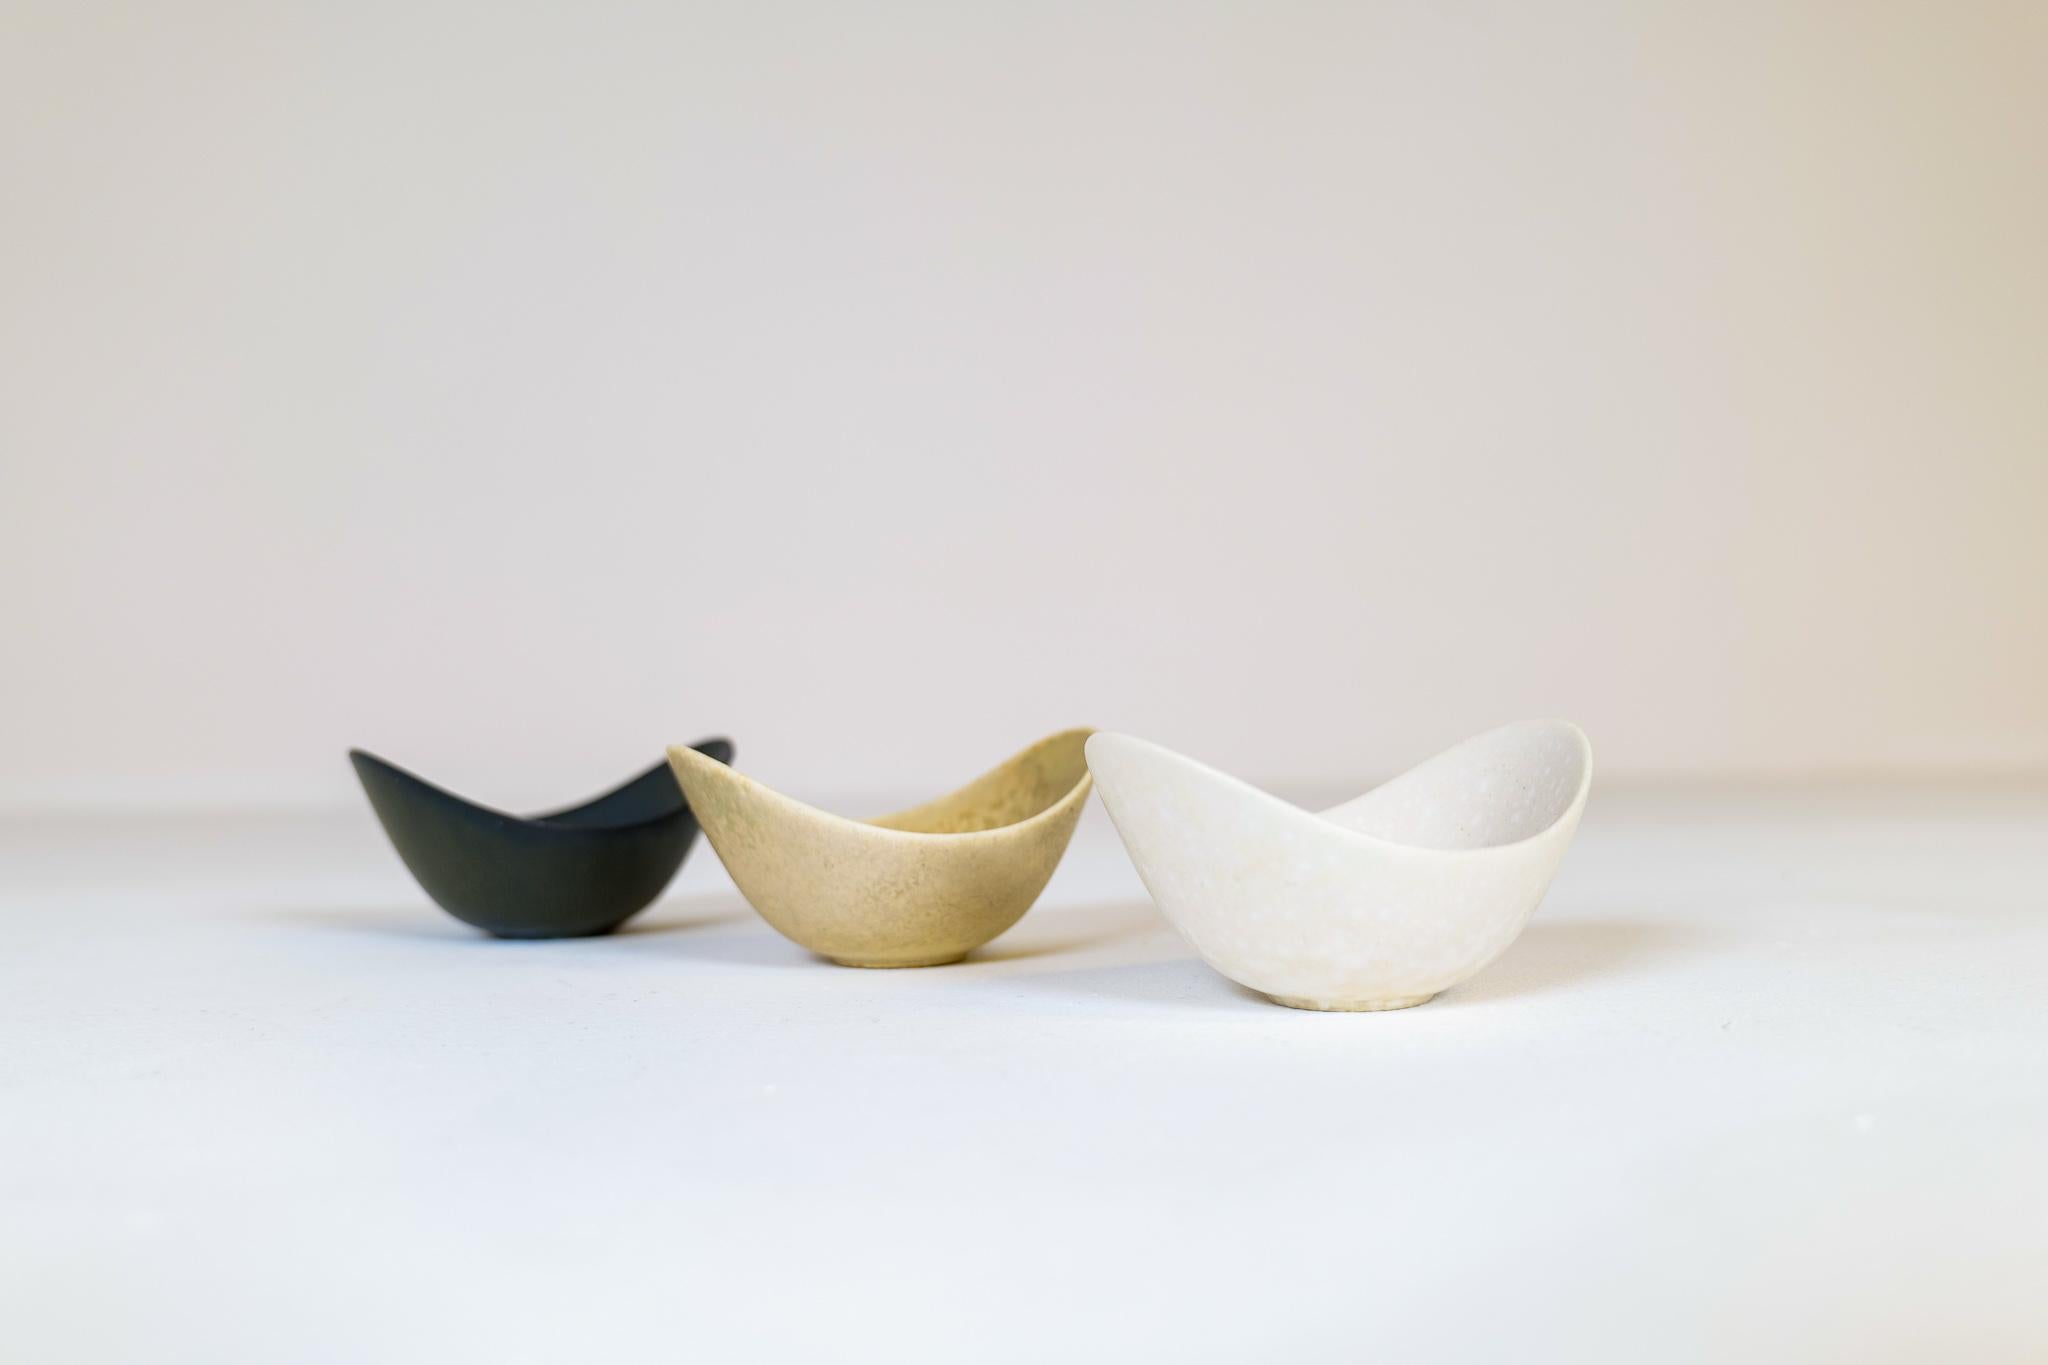 This wonderful collection of 3 small ARO bowls was created and designed by Gunnar Nylund at the Rörstrand Factory in the 1950s, Sweden.

The glaze is amazing and works with the articulate form of the bowls.

Good condition.

Measures: W 10, D